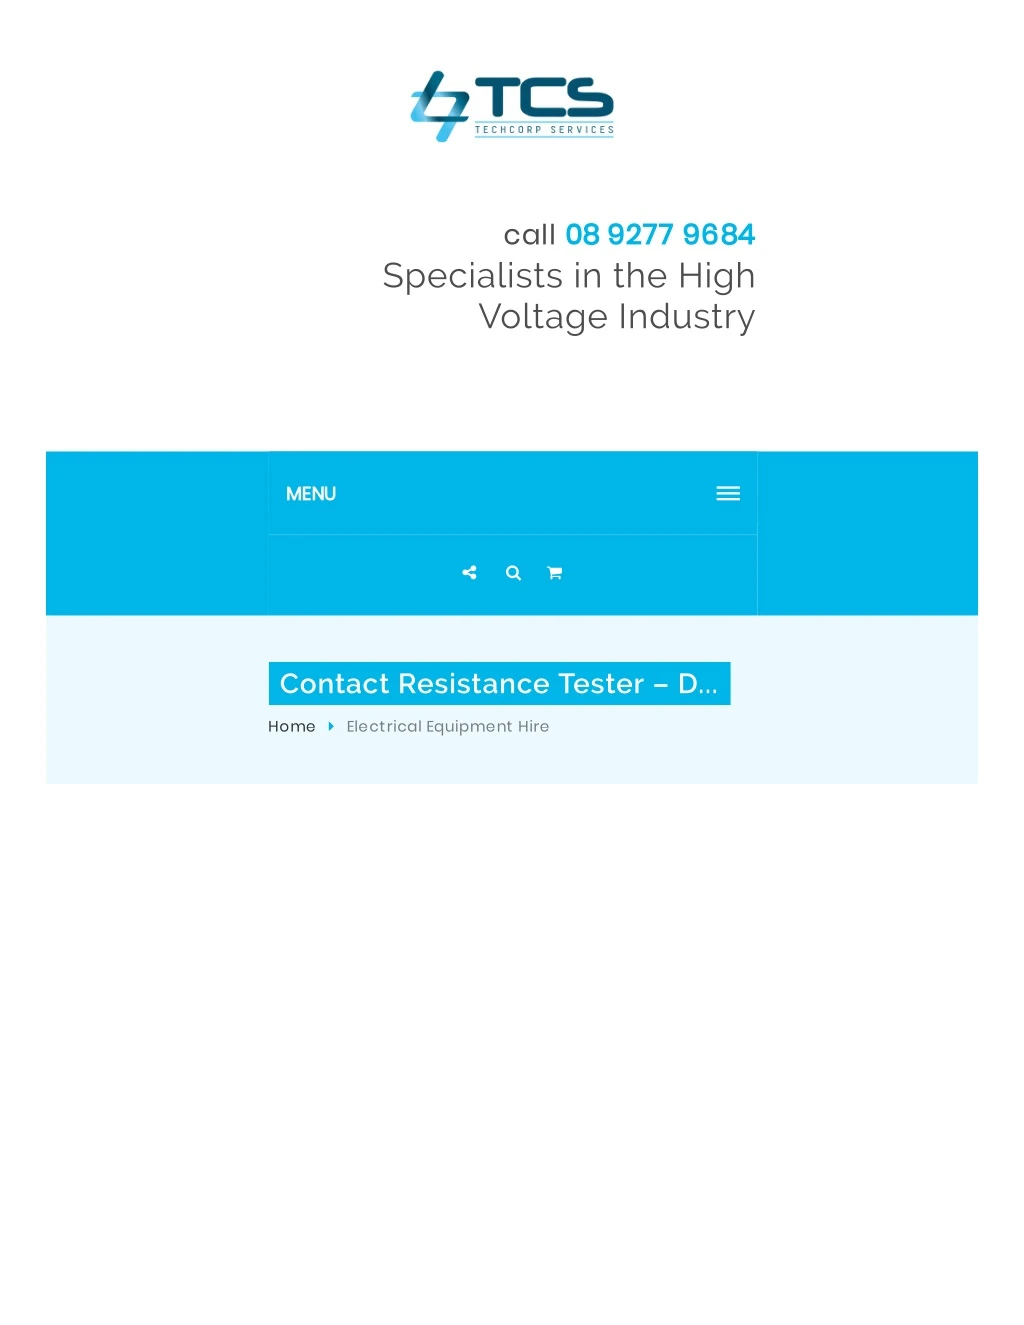 call 08 9277 9684 specialists in the high voltage